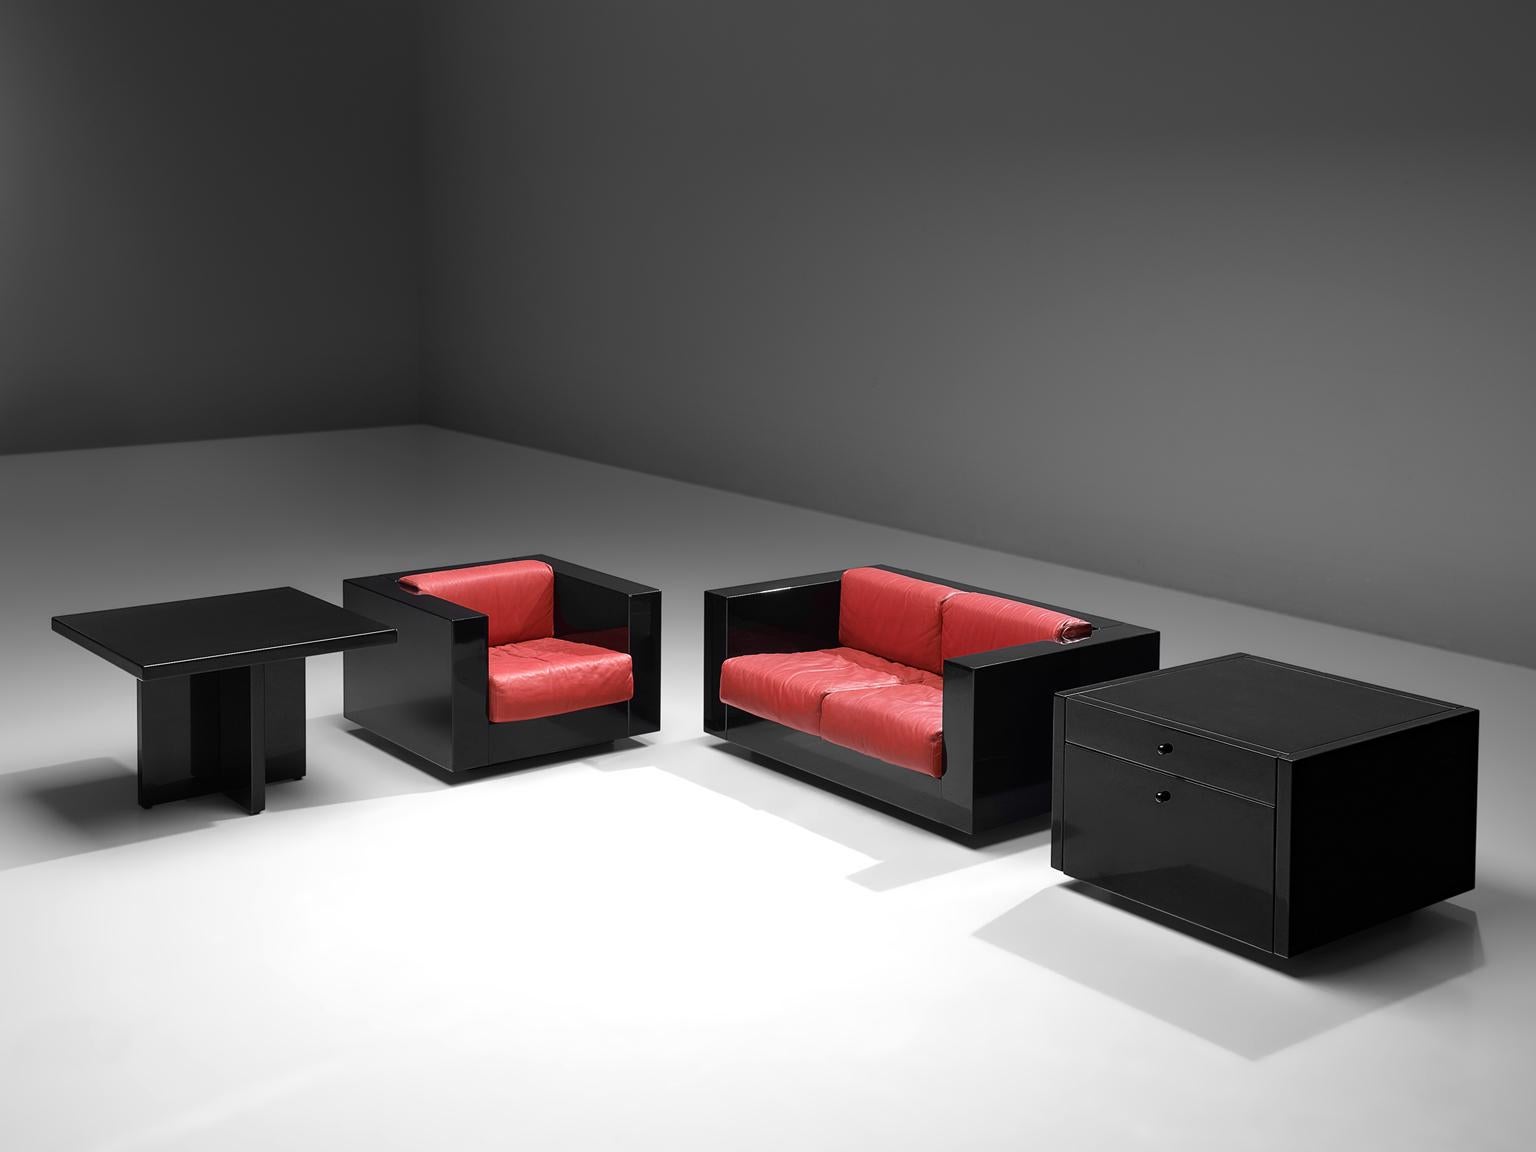 Massimo and Lella Vignelli for Poltronova, Saratoga living room set, black lacquered wood and red leather, Italy, 1964. 

This living room set named 'Sartoga' is designed by Italian designer couple Lella & Massimo Vignelli. The Vignelli's were known